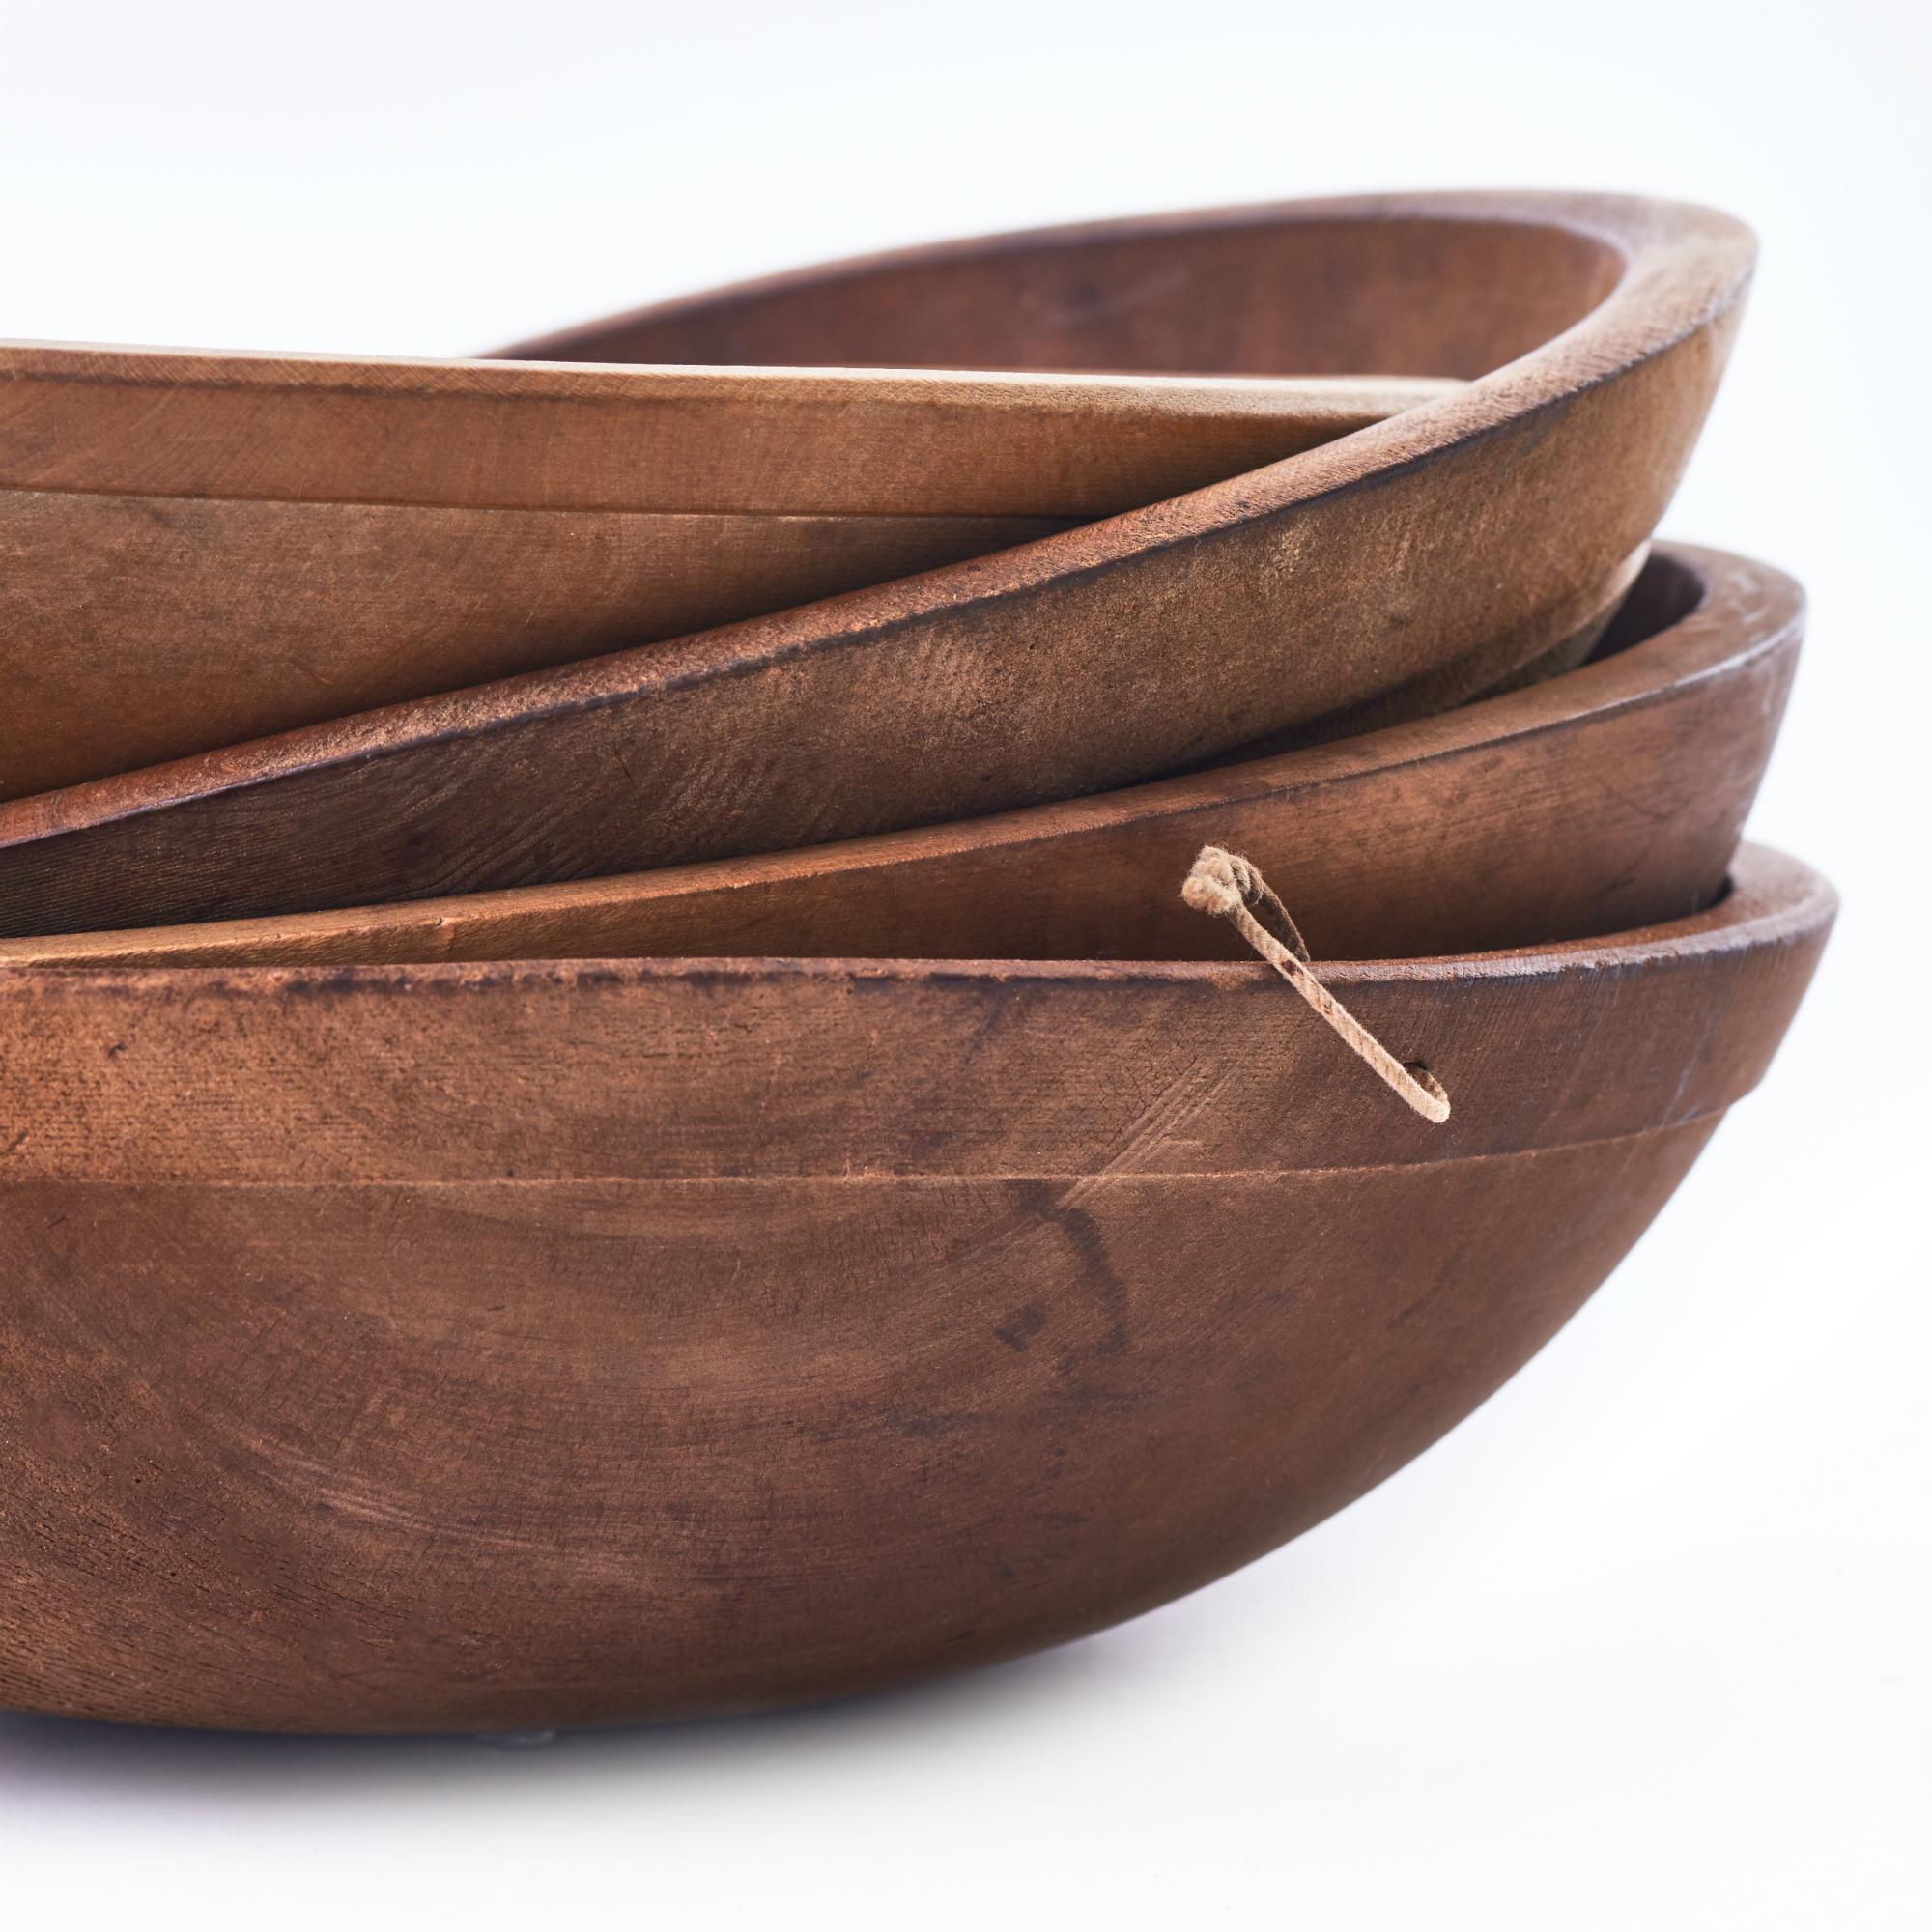 Set of four early 20th century dough bowls from England. Graduated sizes, with some wear consistent with usage. Beautiful naturally aged patina. 

Measures: 4” H x 12”-15.5” D.